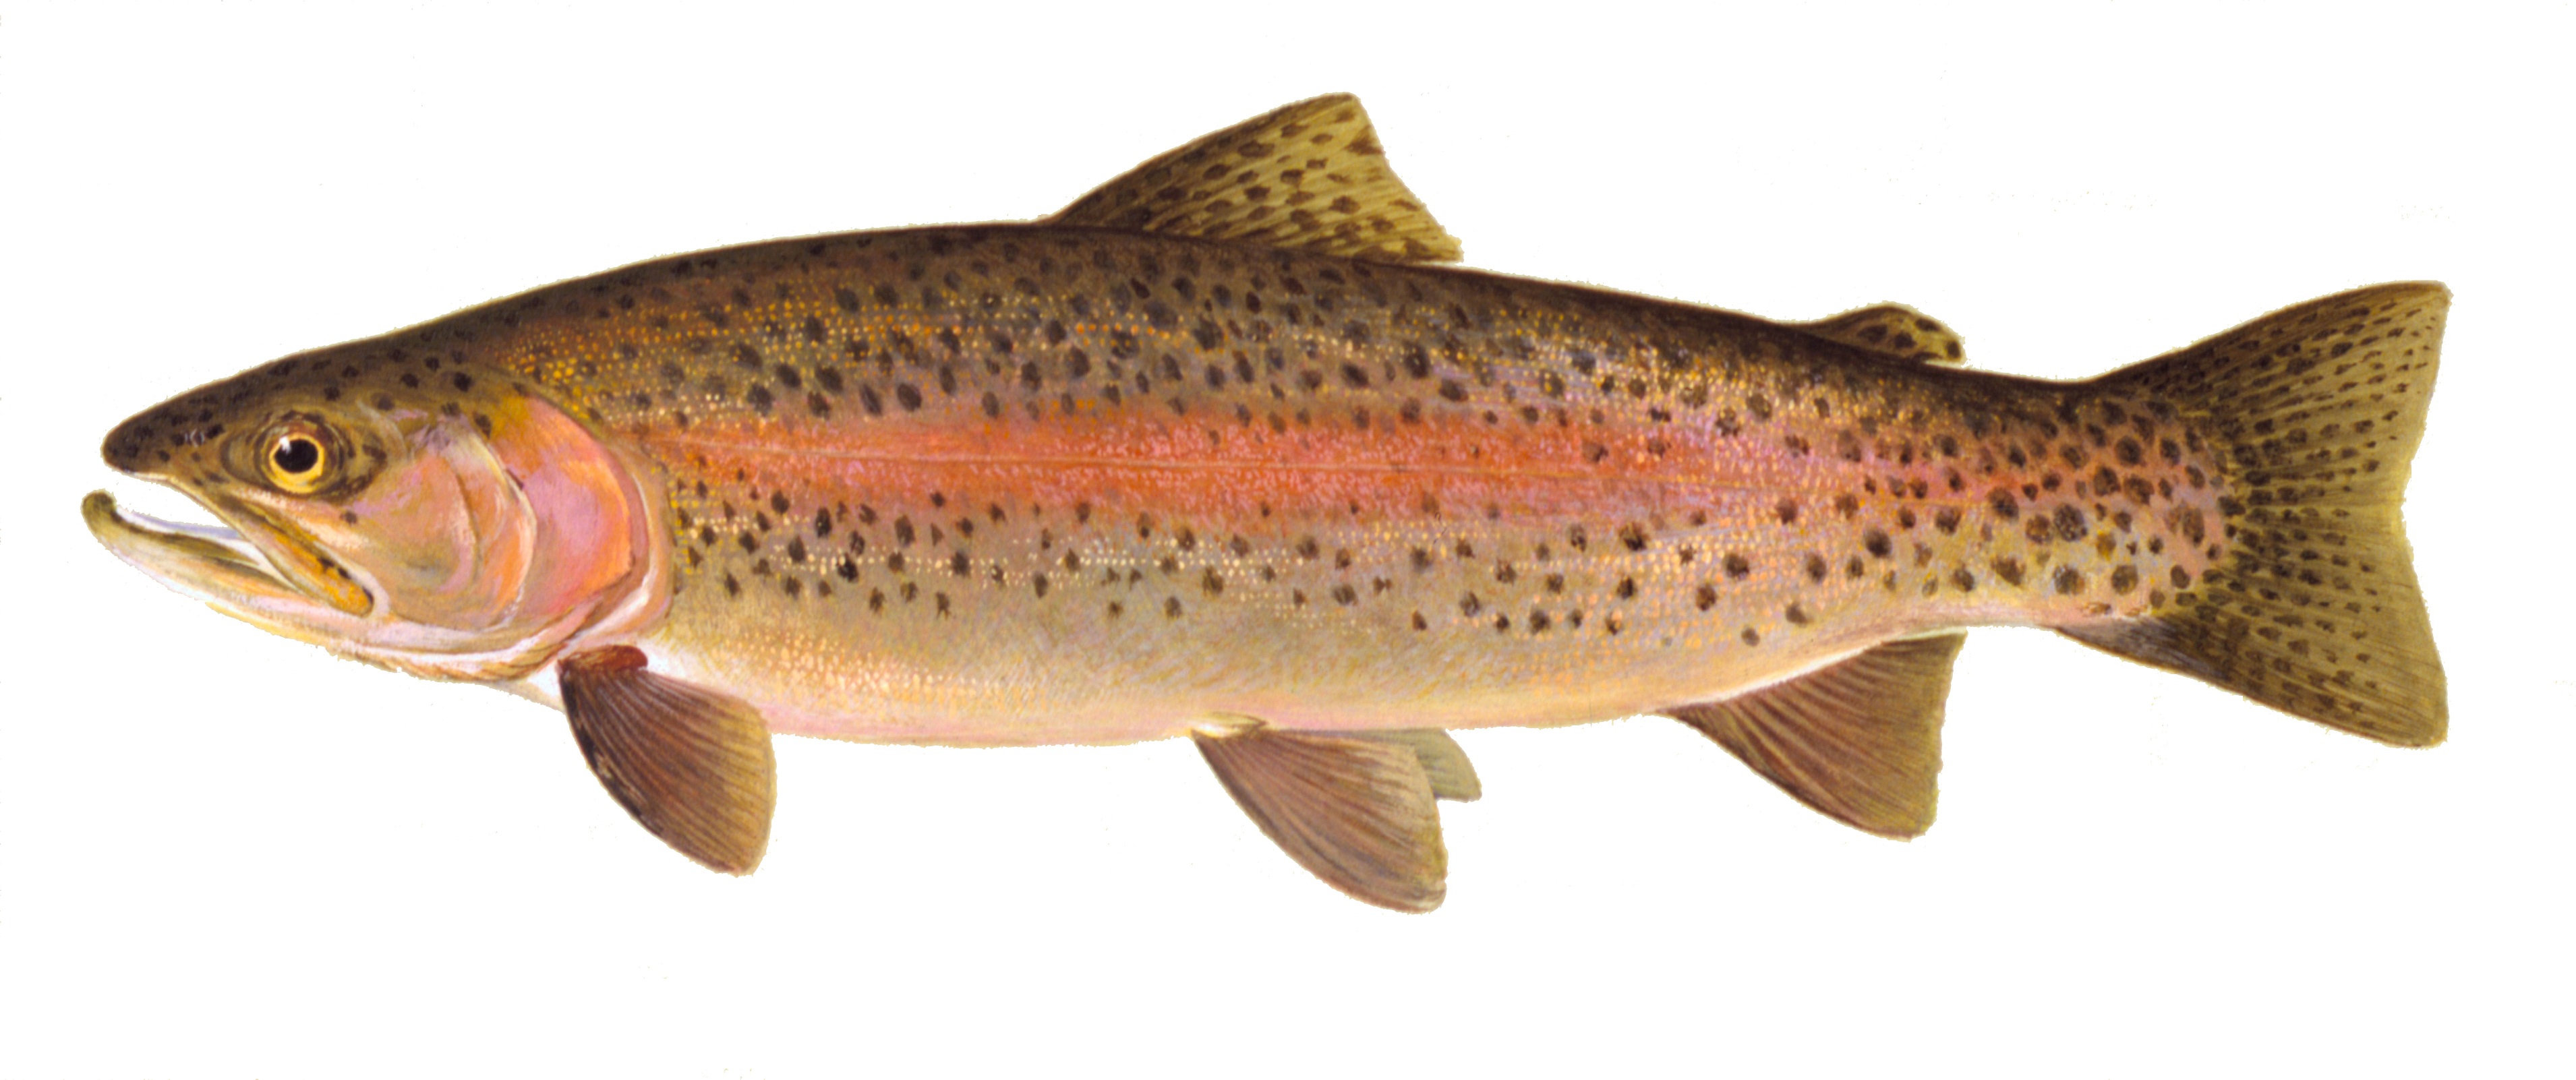 Rainbow Trout, illustration by Maynard Reece, from Iowa Fish and Fishing.